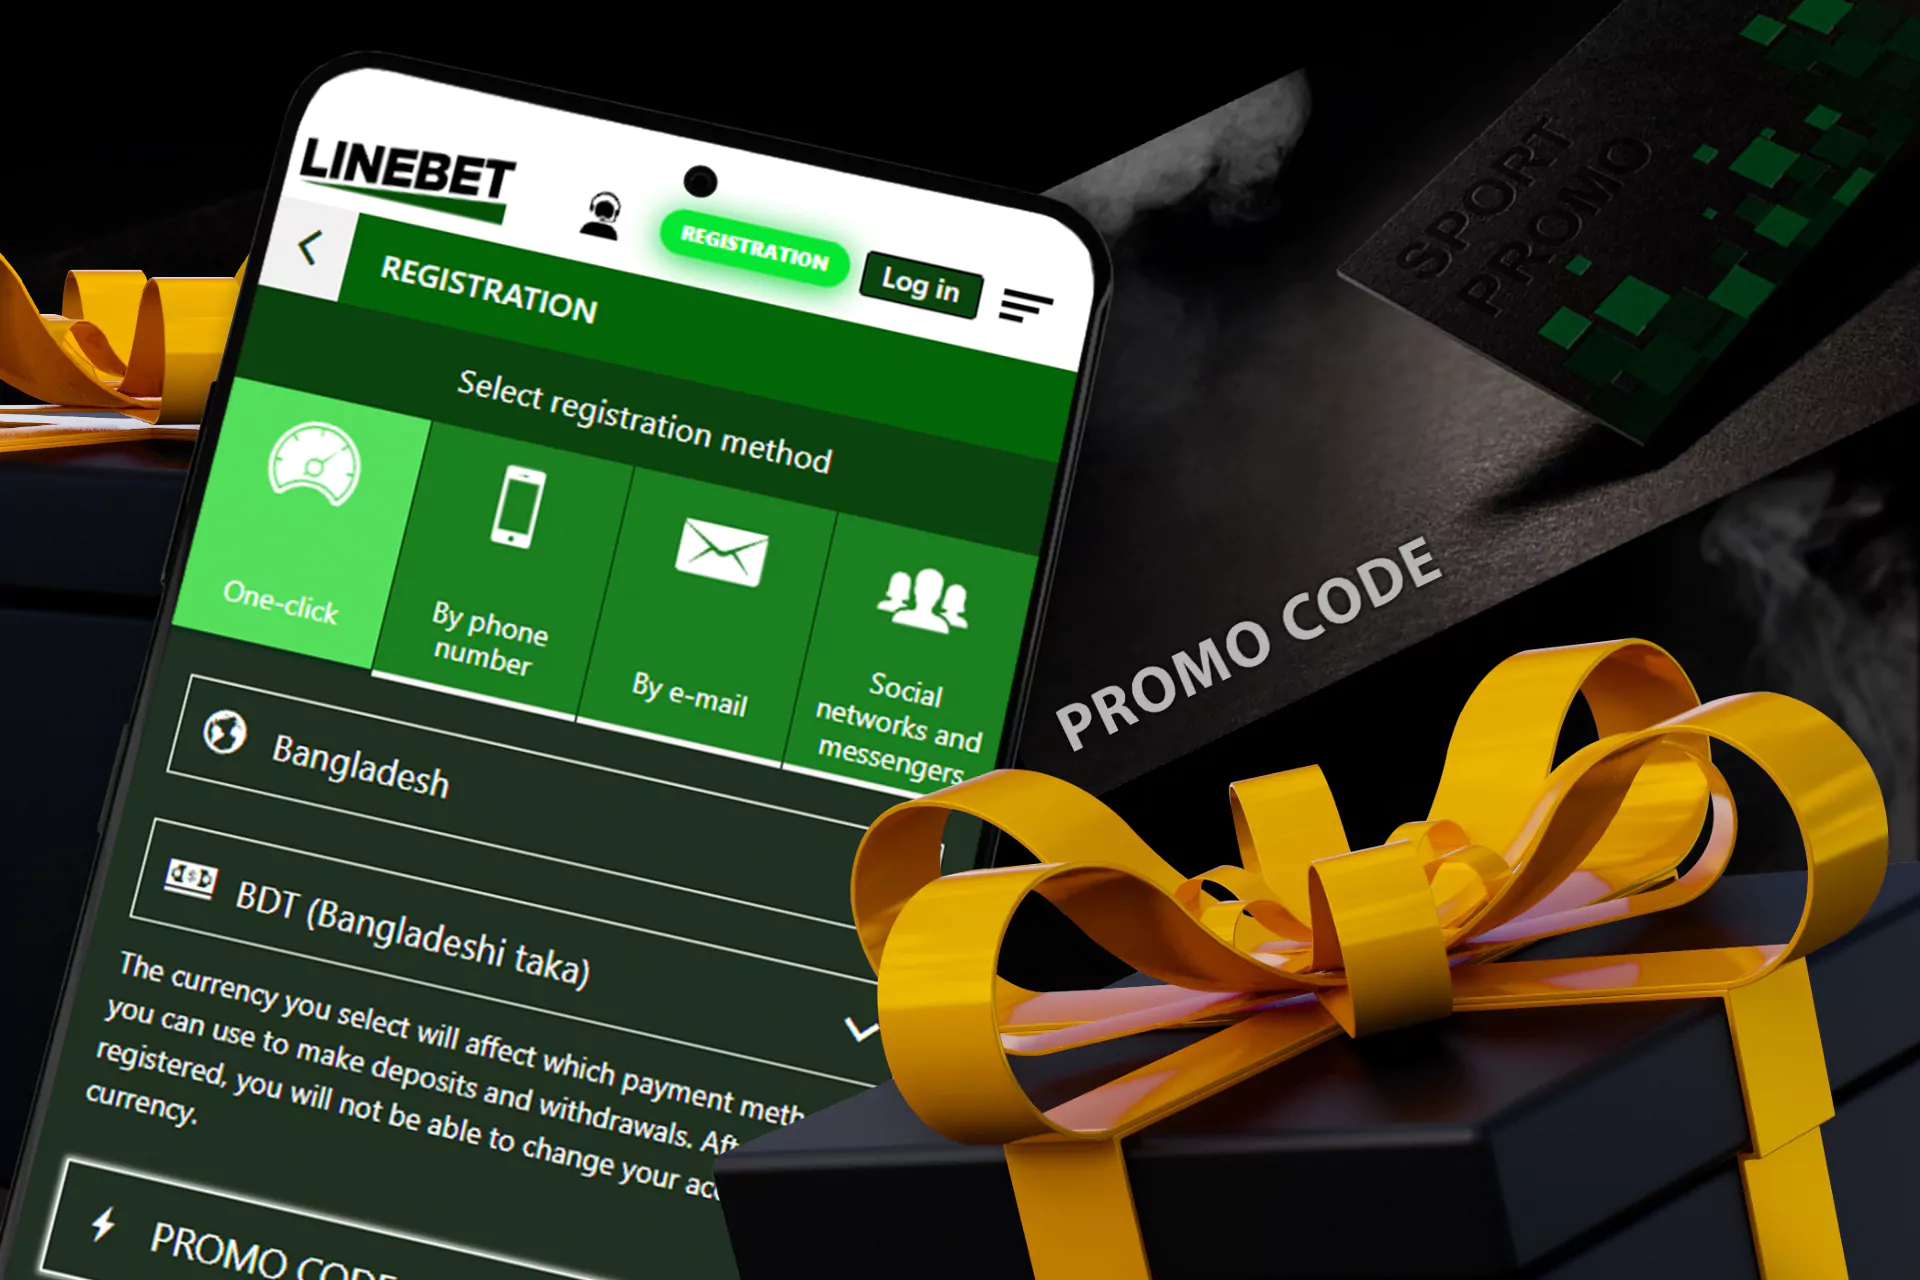 Use our promo code to increase your profit.